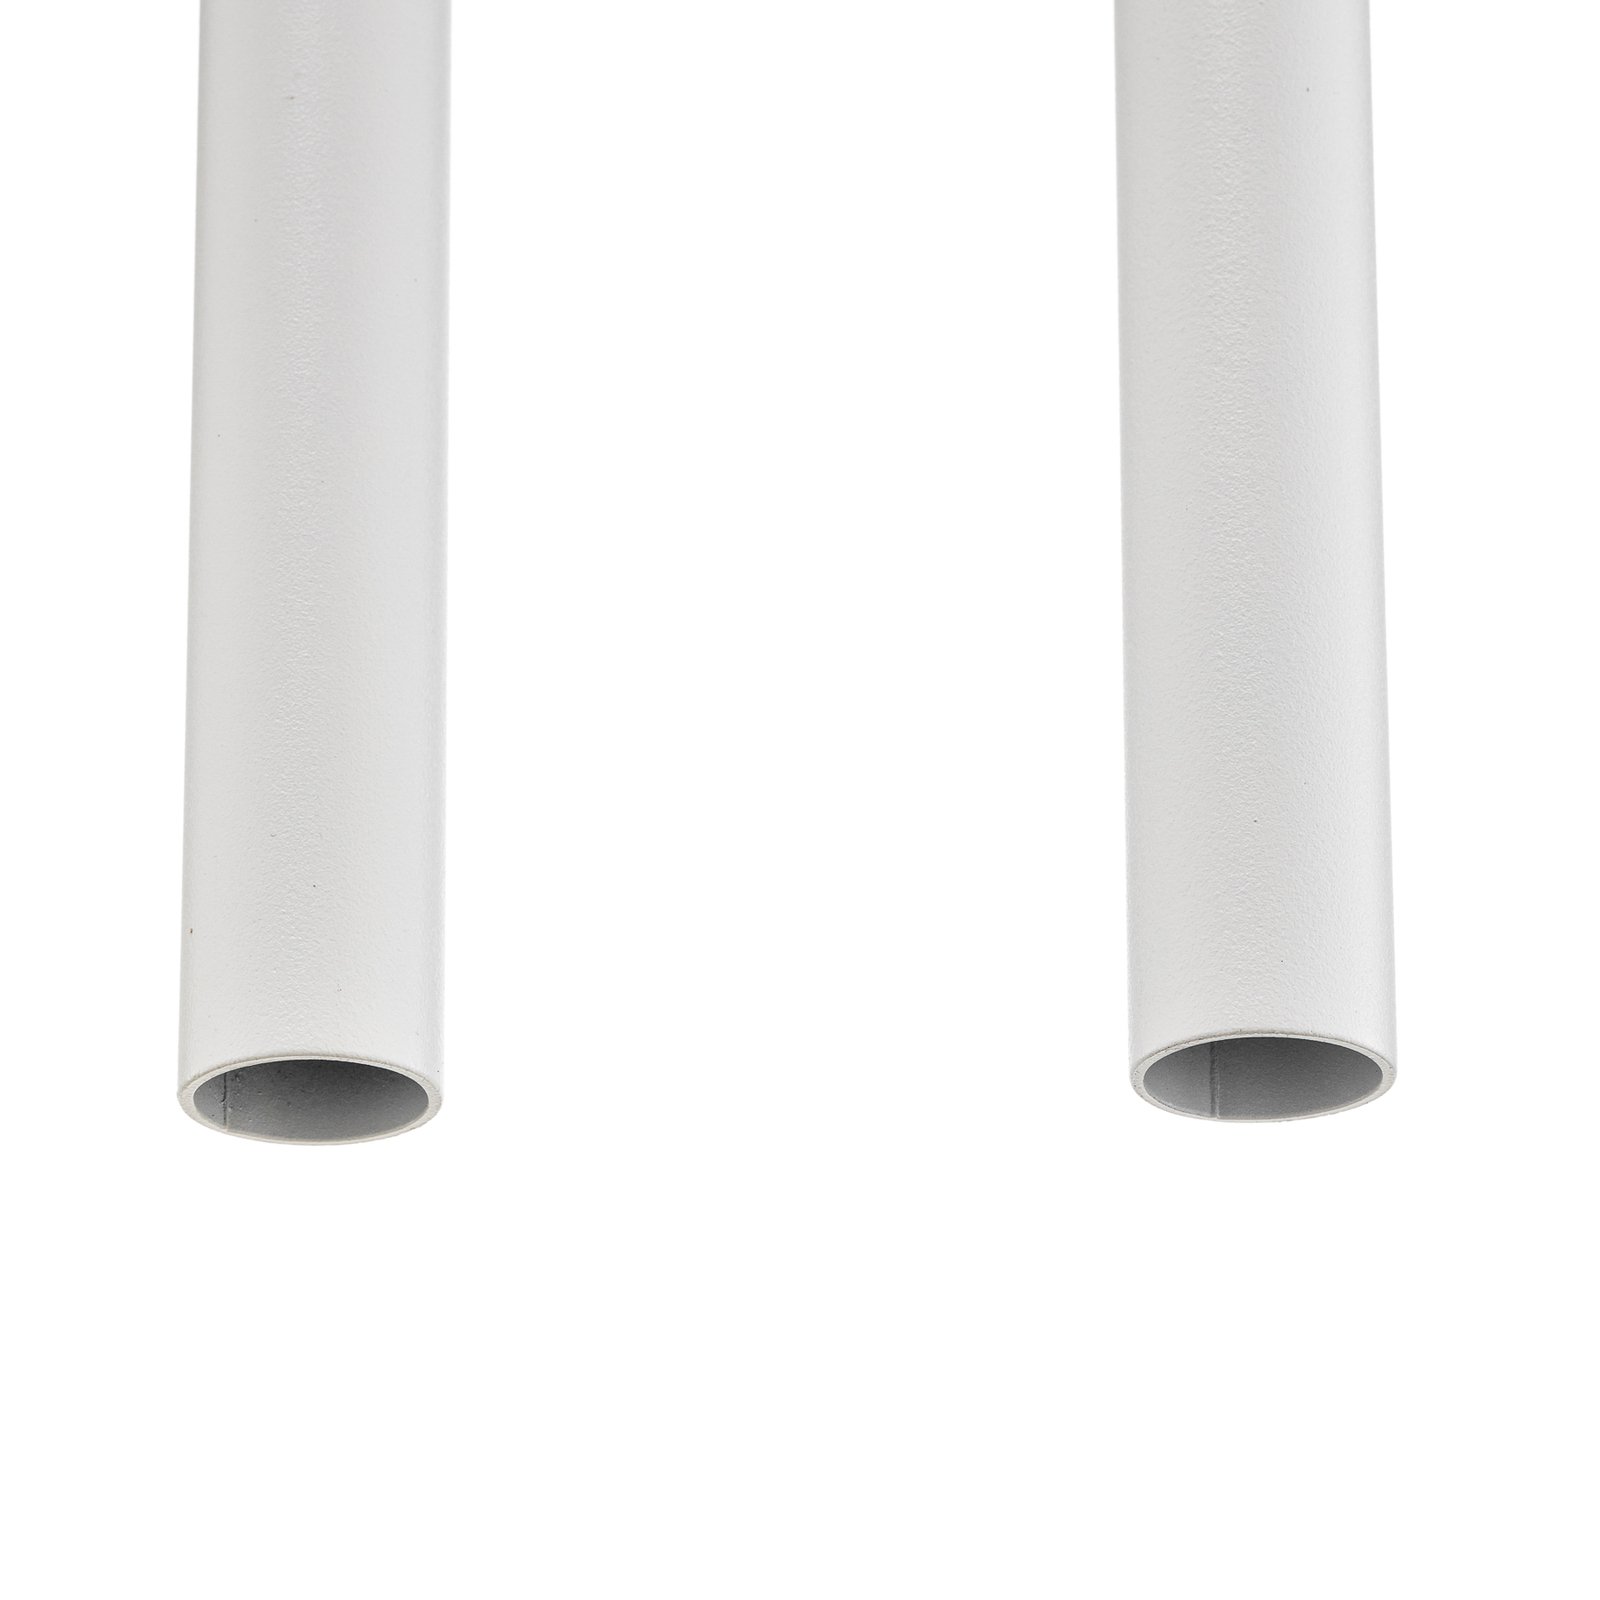 Thin hanglamp, wit, 5-lamps, linear